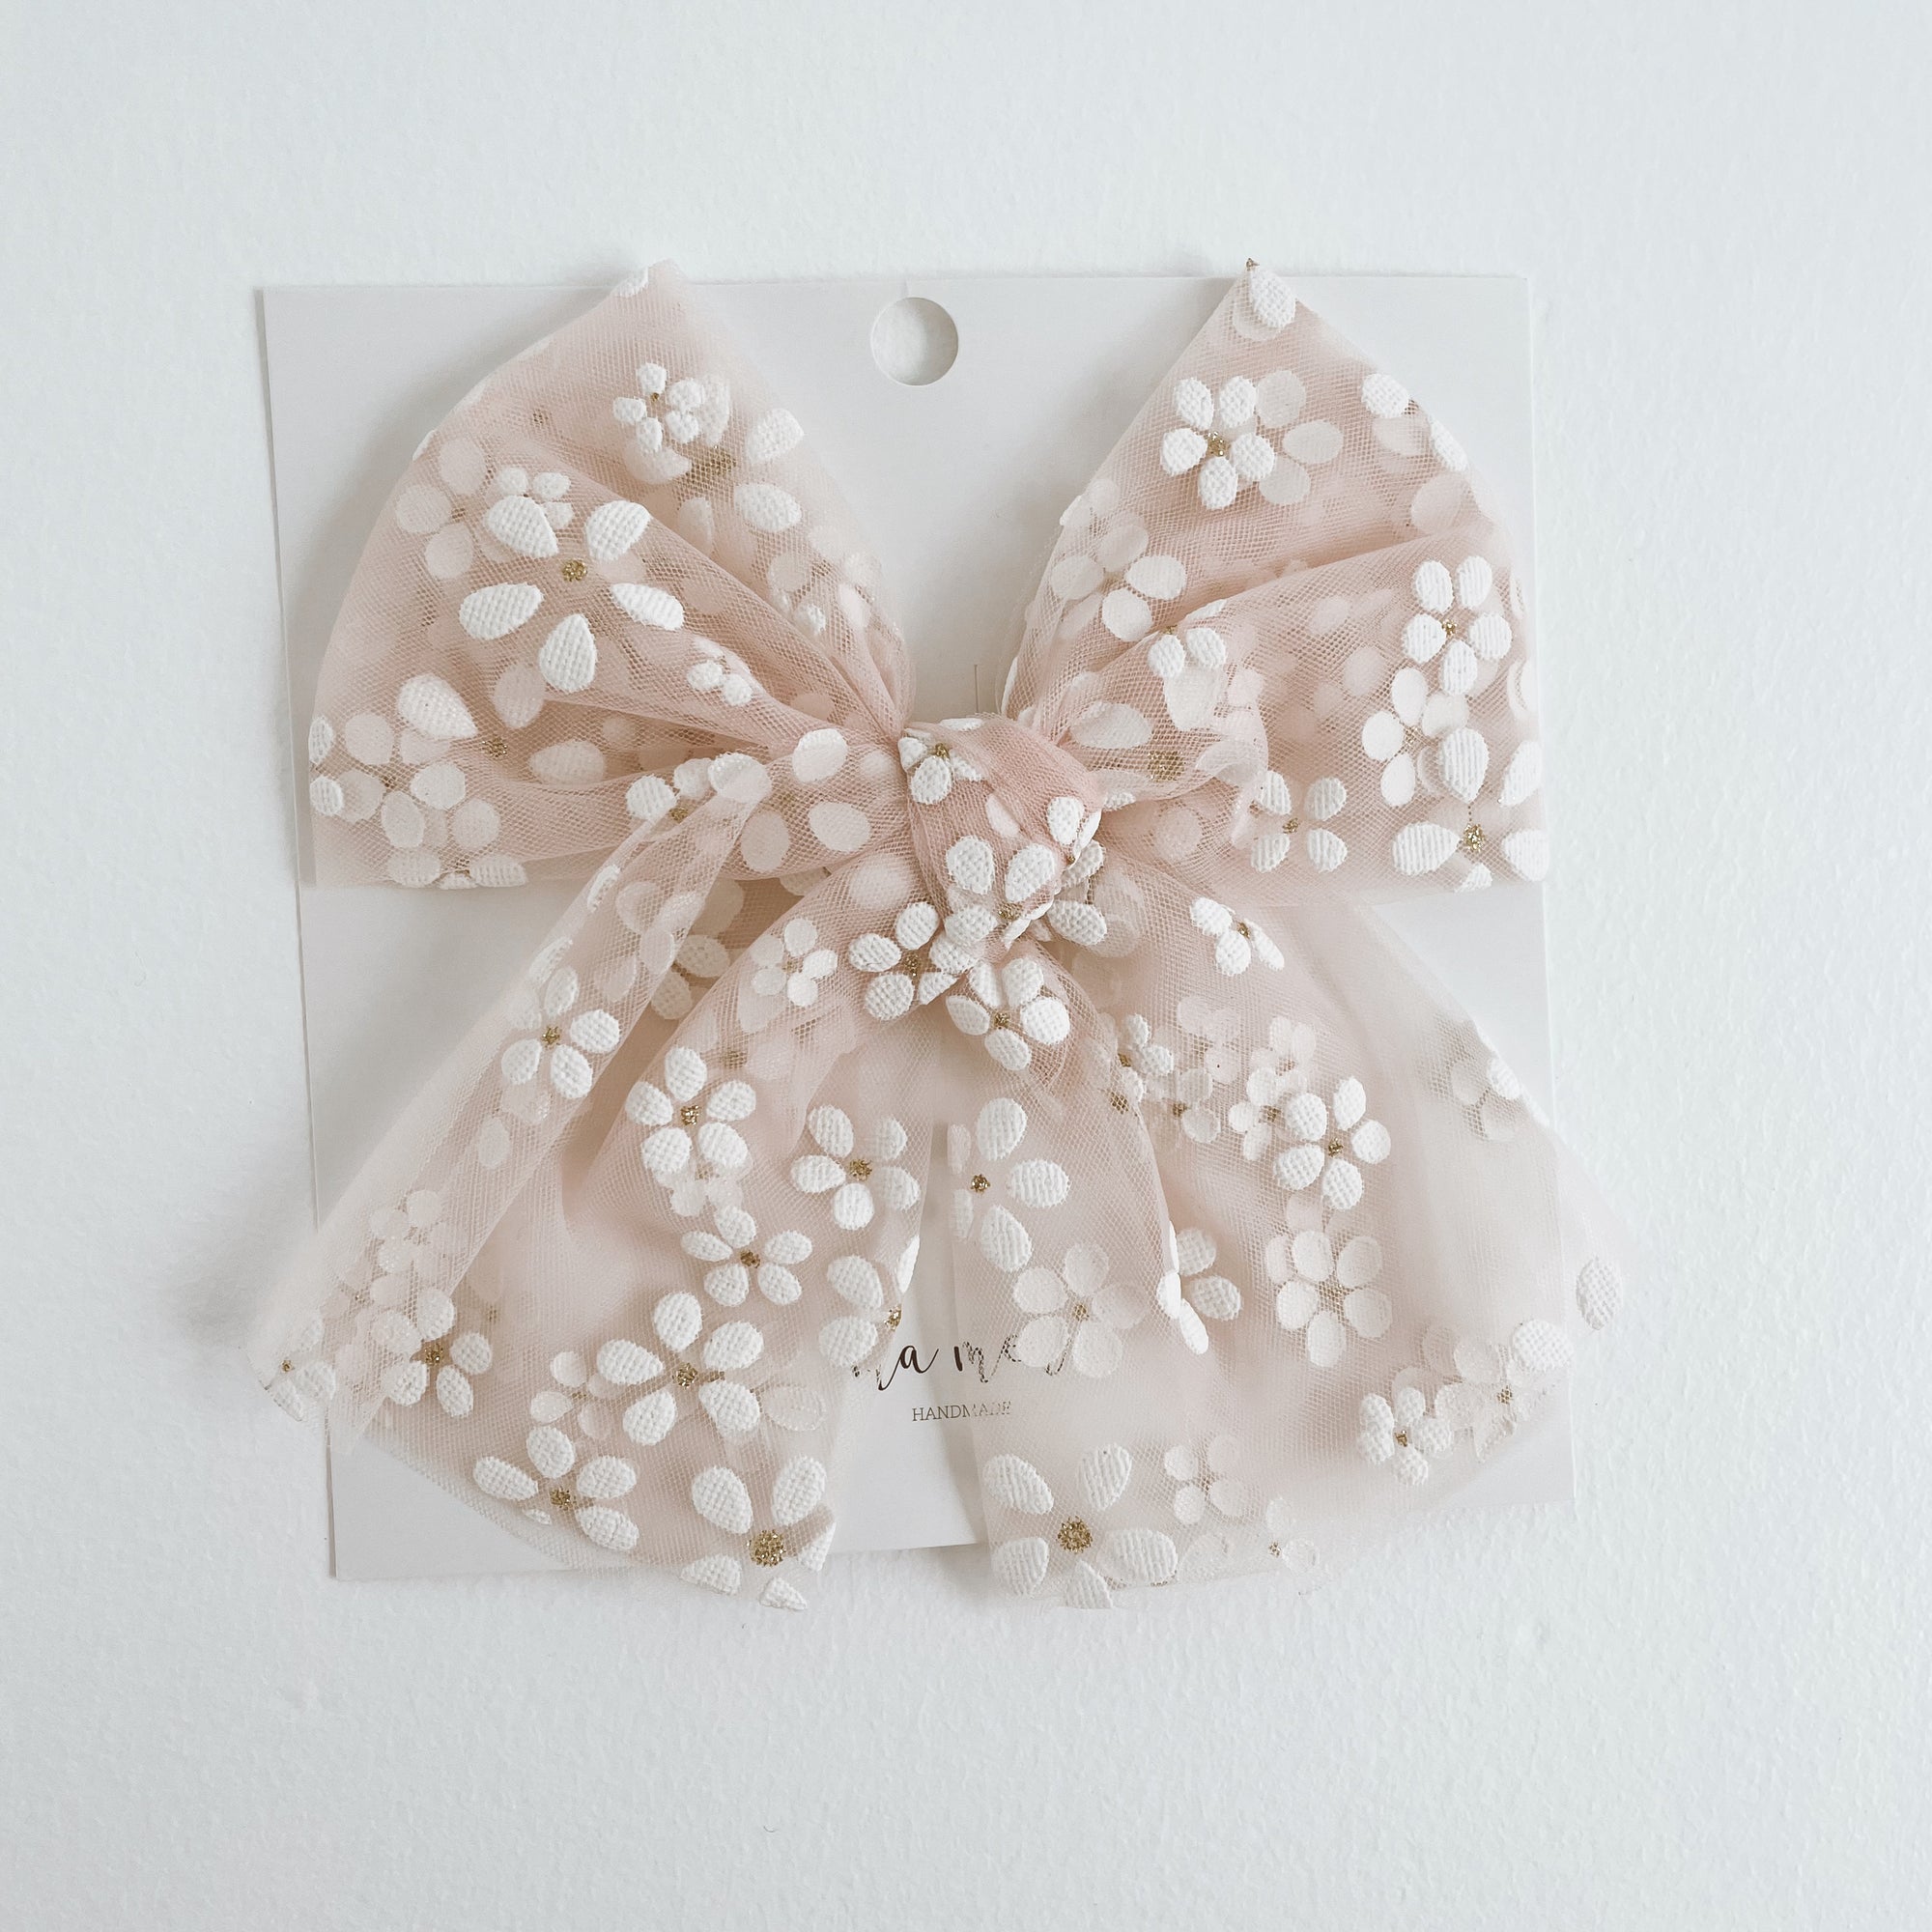 MA MER VALENTINA PARTY BOWS: PINK FLOWERS